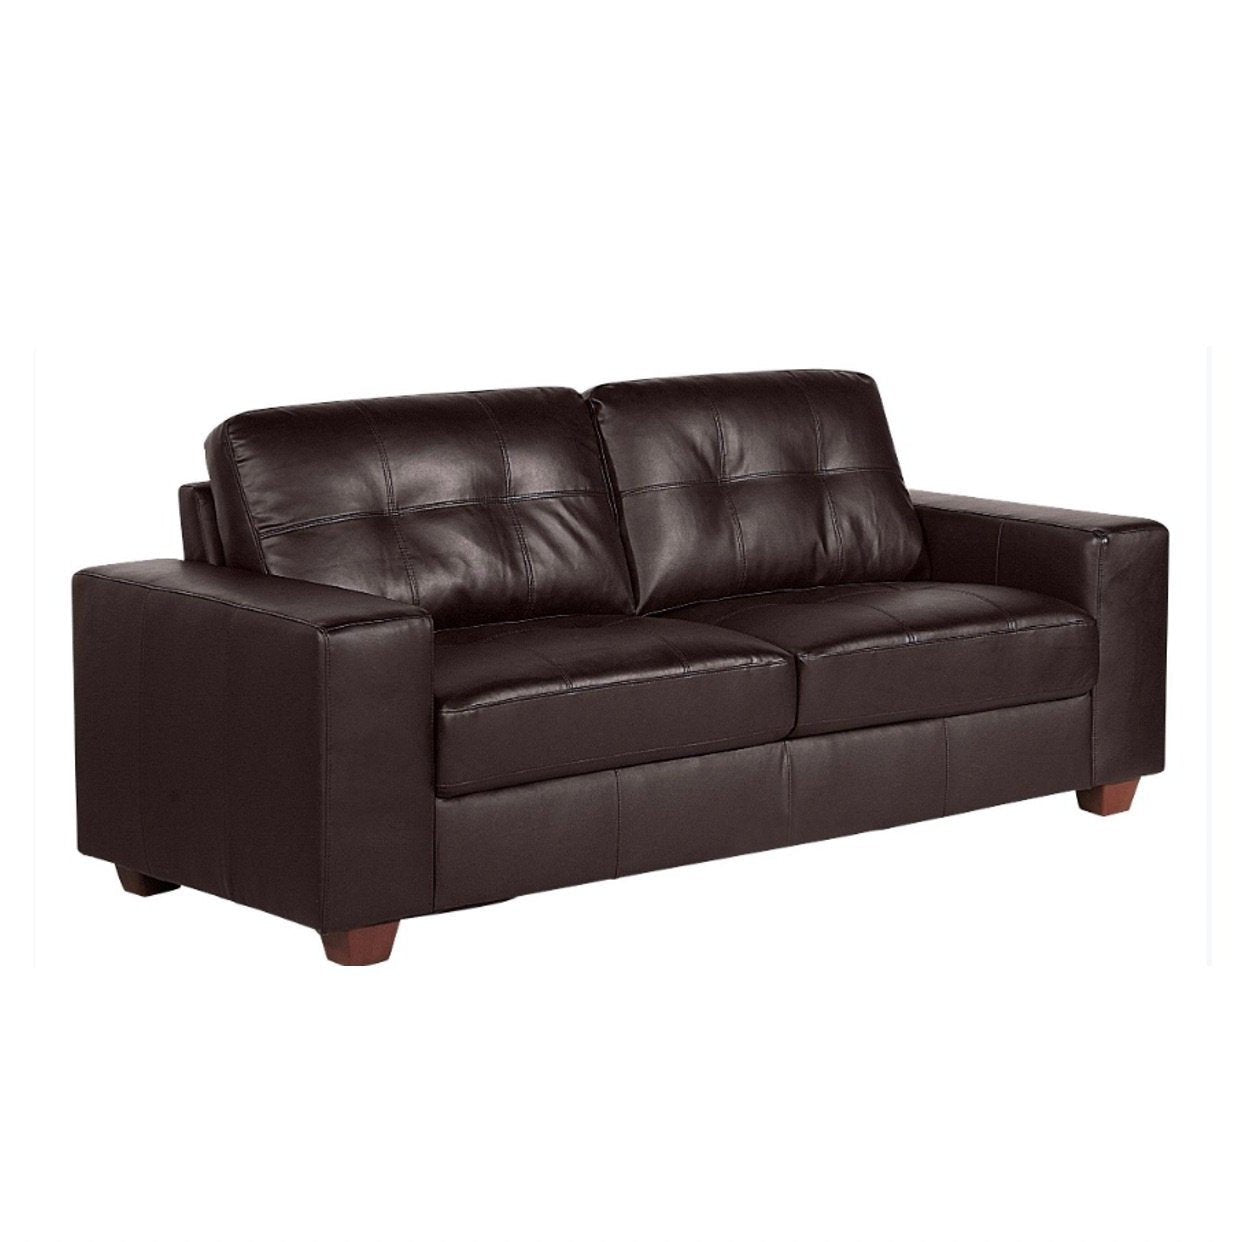 Aster 3 seater sofa - brown leather | Manor Interiors